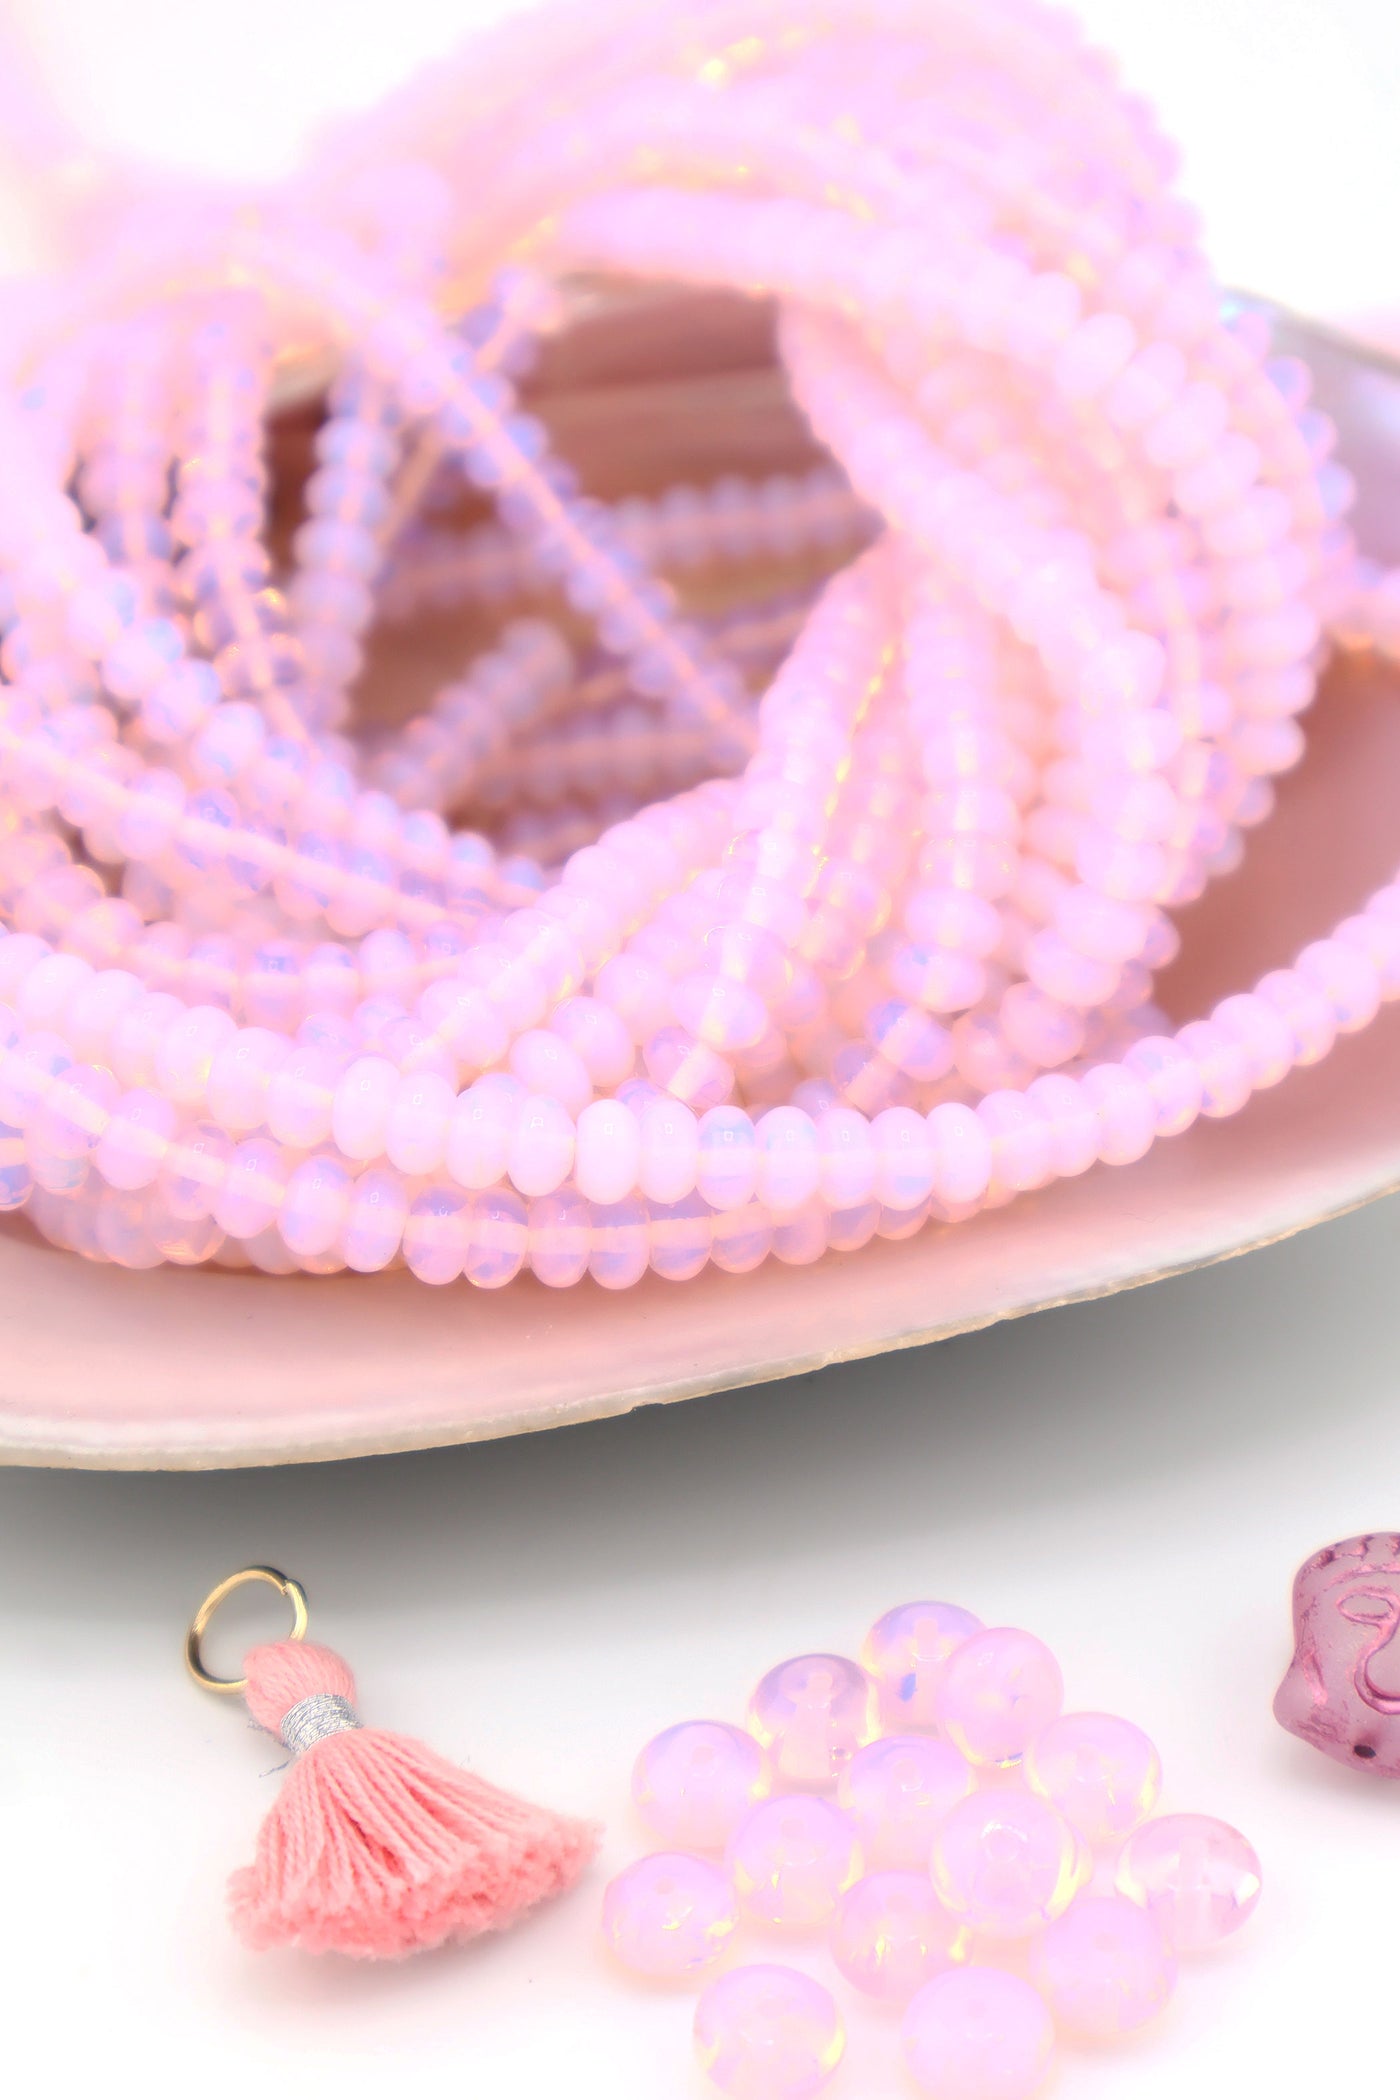 The galaxy-like pastel pink in these jellyfish opalite beads is great for beginner DIY jewelry.